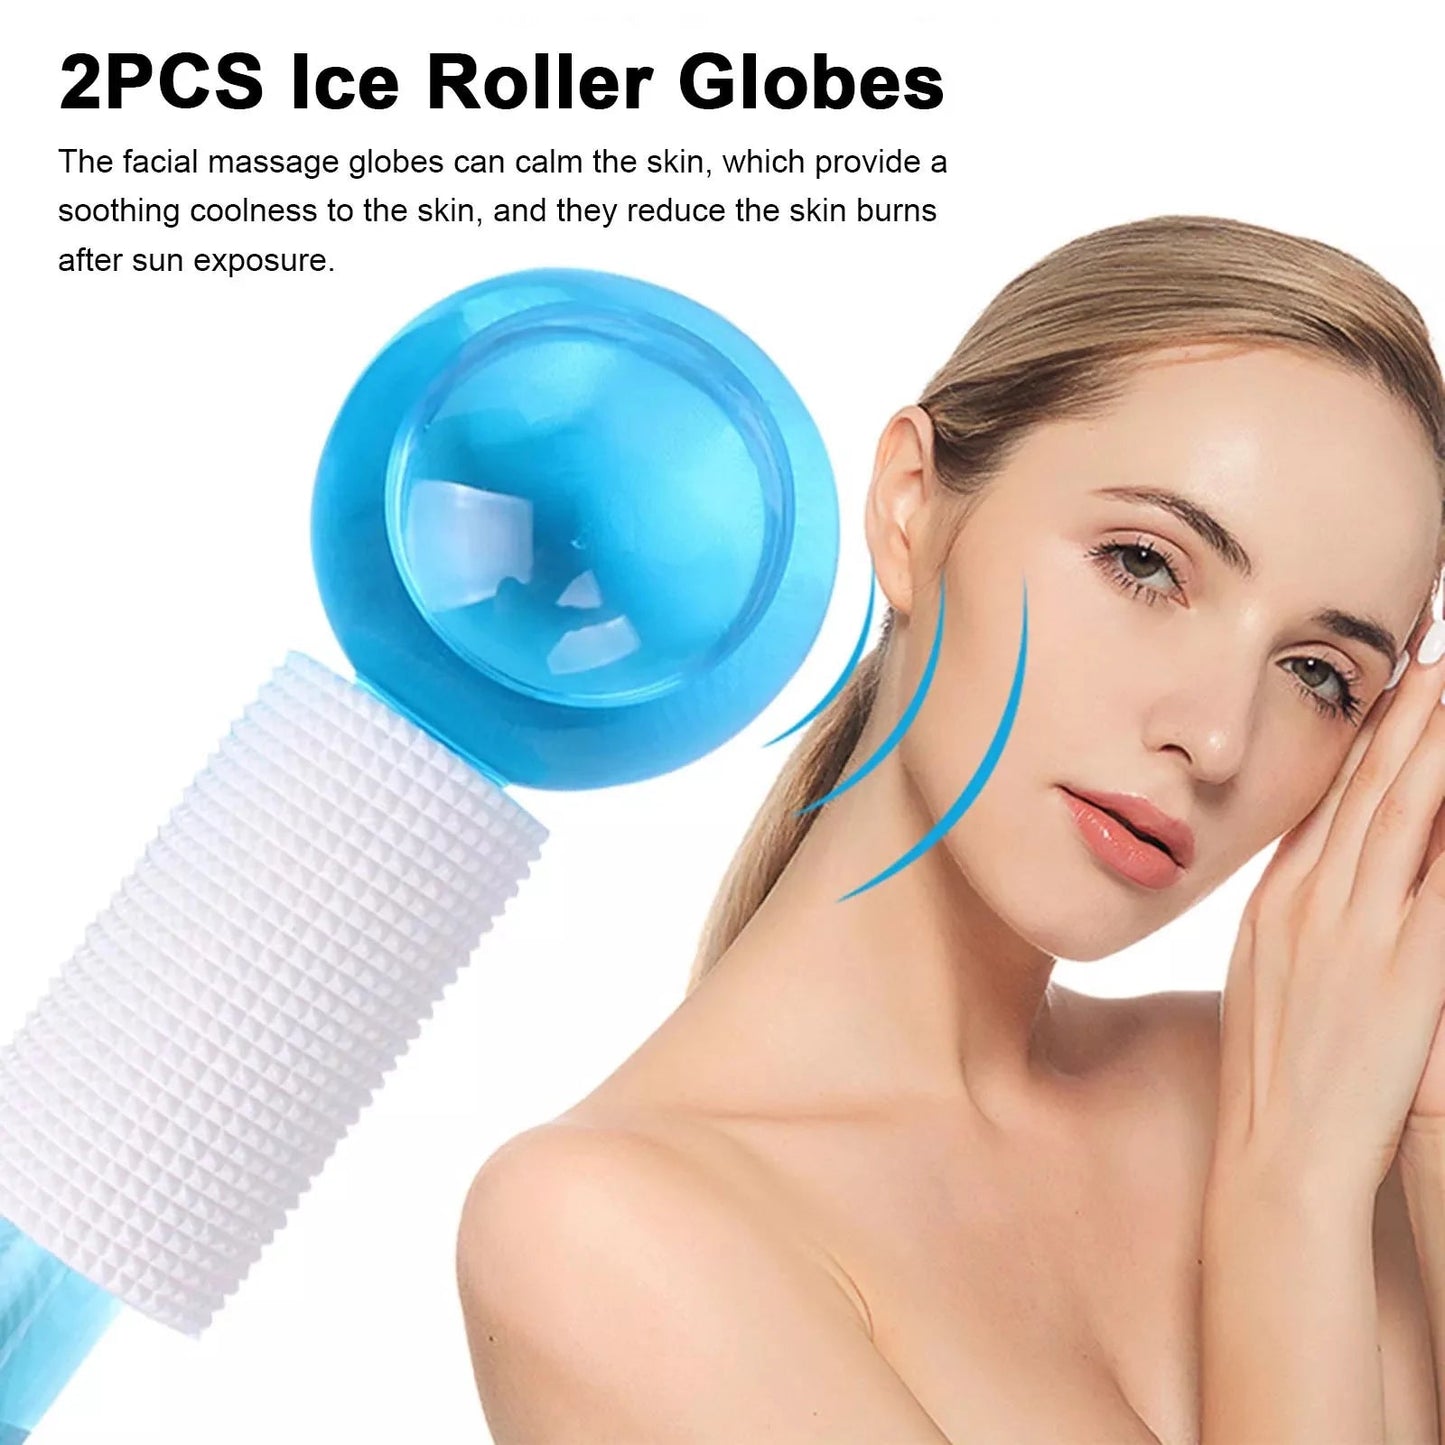 Cryotherapy Ice Globe | Blue | 2 PC | Cold Face Ice Balls for Skin Care | Daily Beauty Routines | NUDE U SPAS NUDE U 